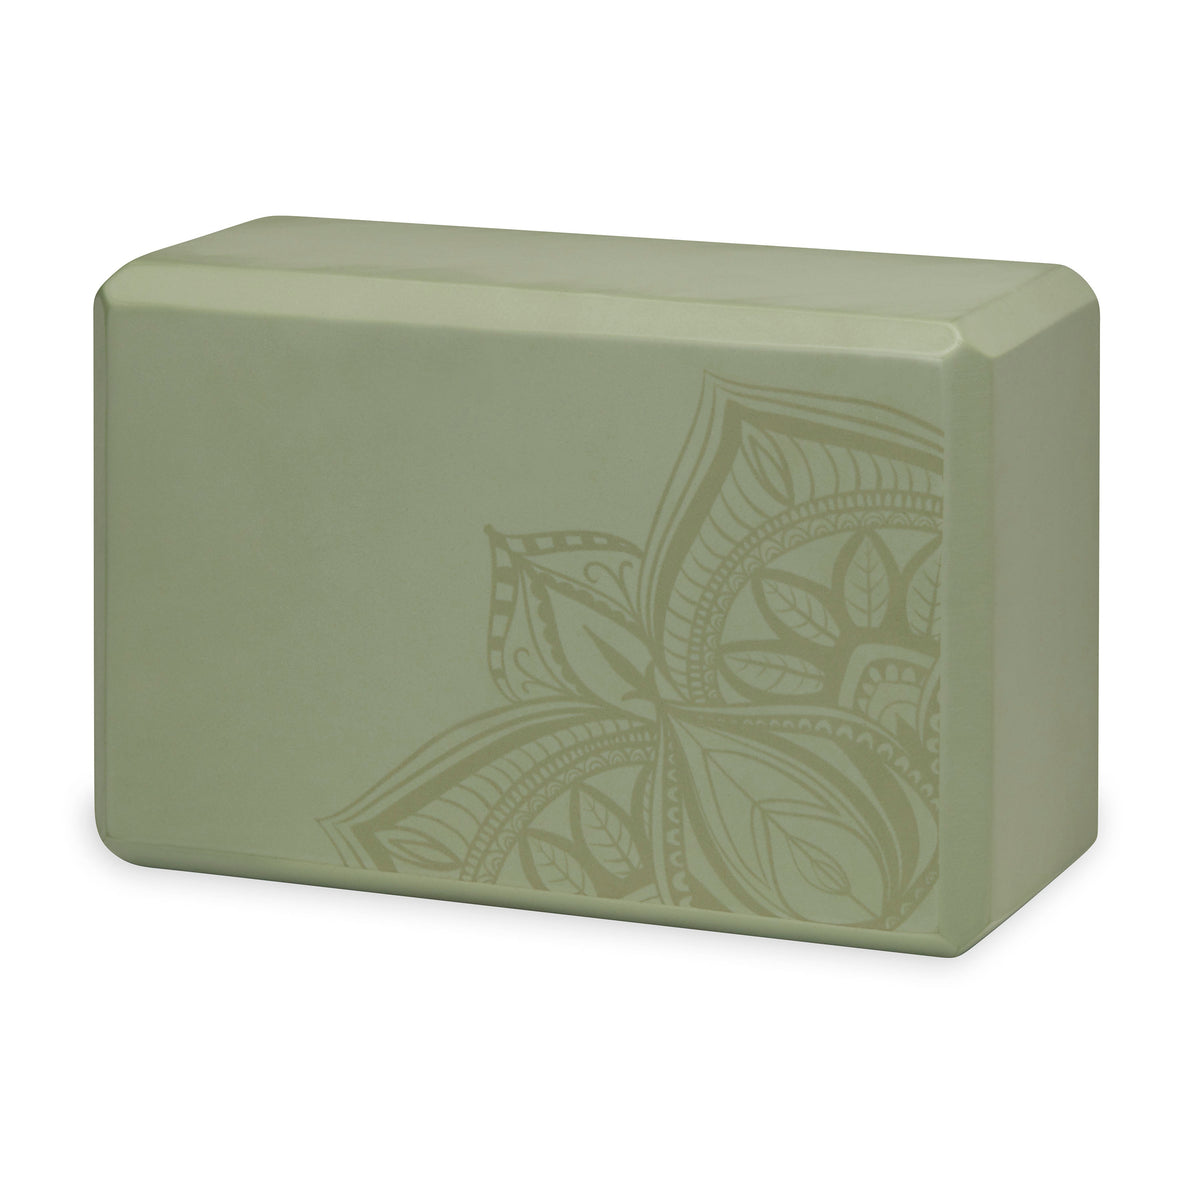 Gaiam Printed Yoga Block Celery Point front angle